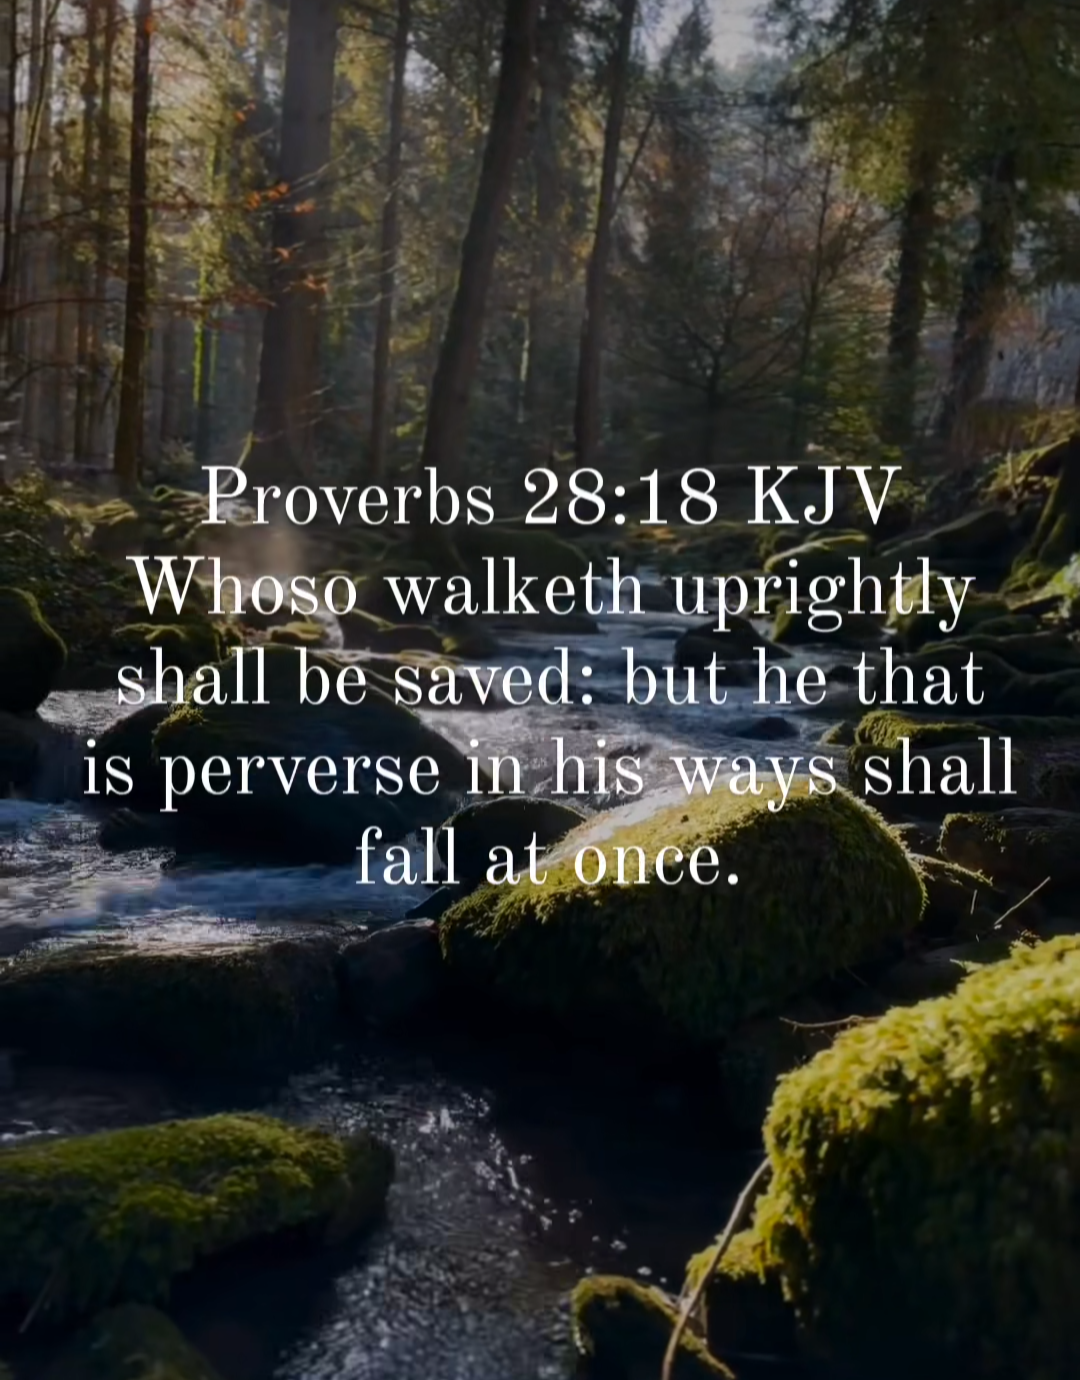 Proverbs 28:18 KJV Whoso walketh uprightly shall be saved: but he that is perverse in his ways shall fall at once.